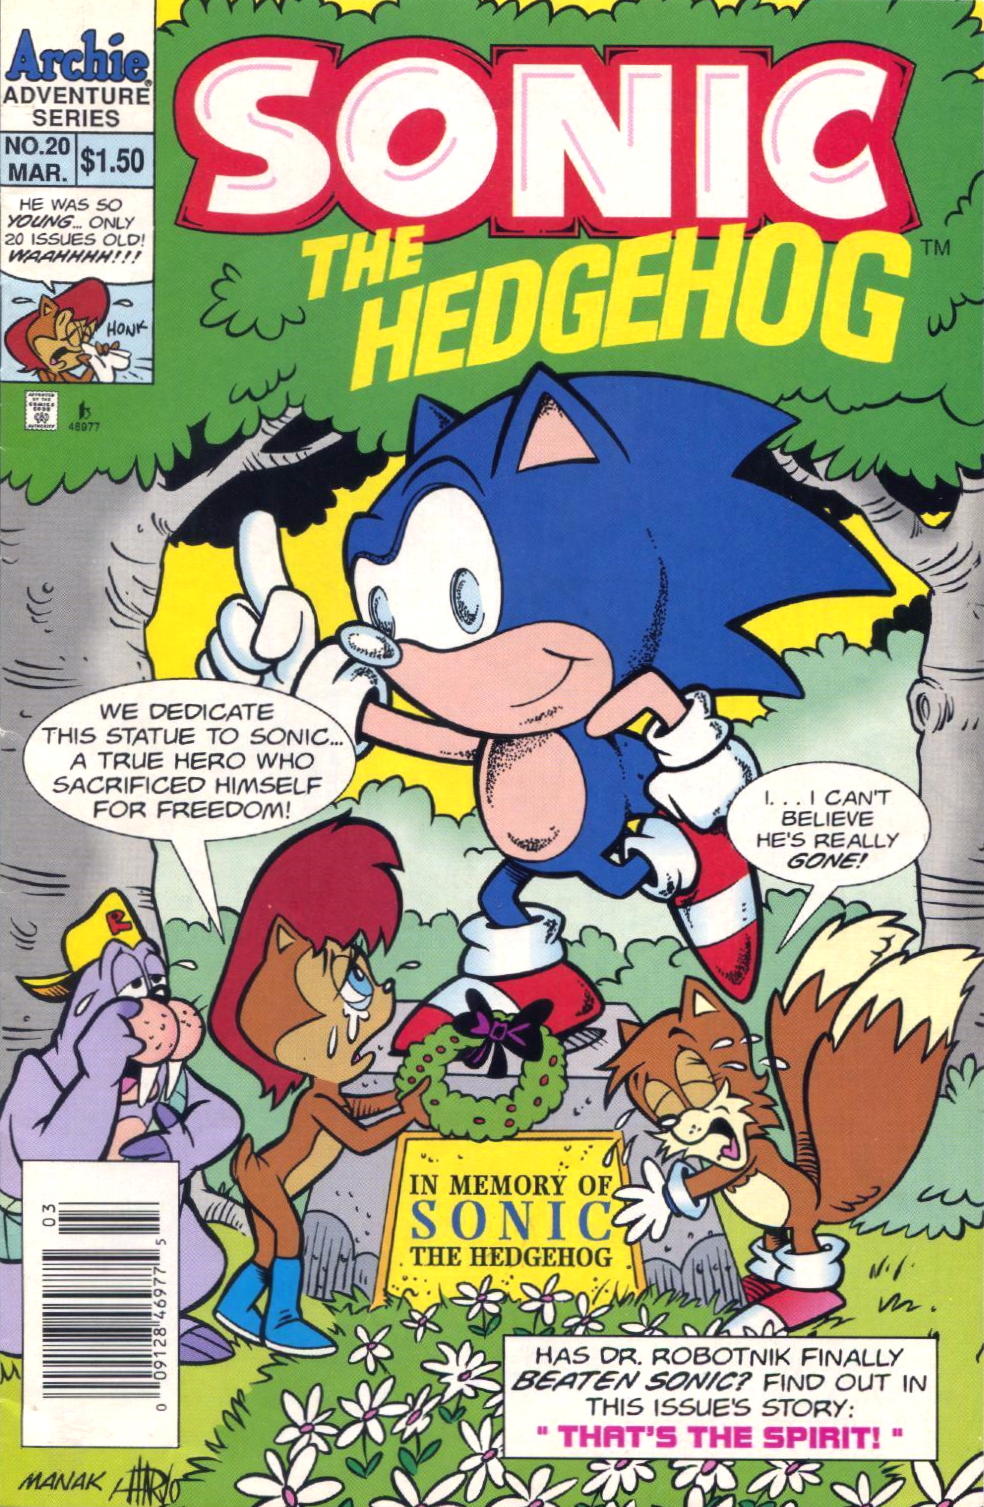 Archie Sonic the Hedgehog Issue 20 | Sonic News Network | FANDOM powered by Wikia